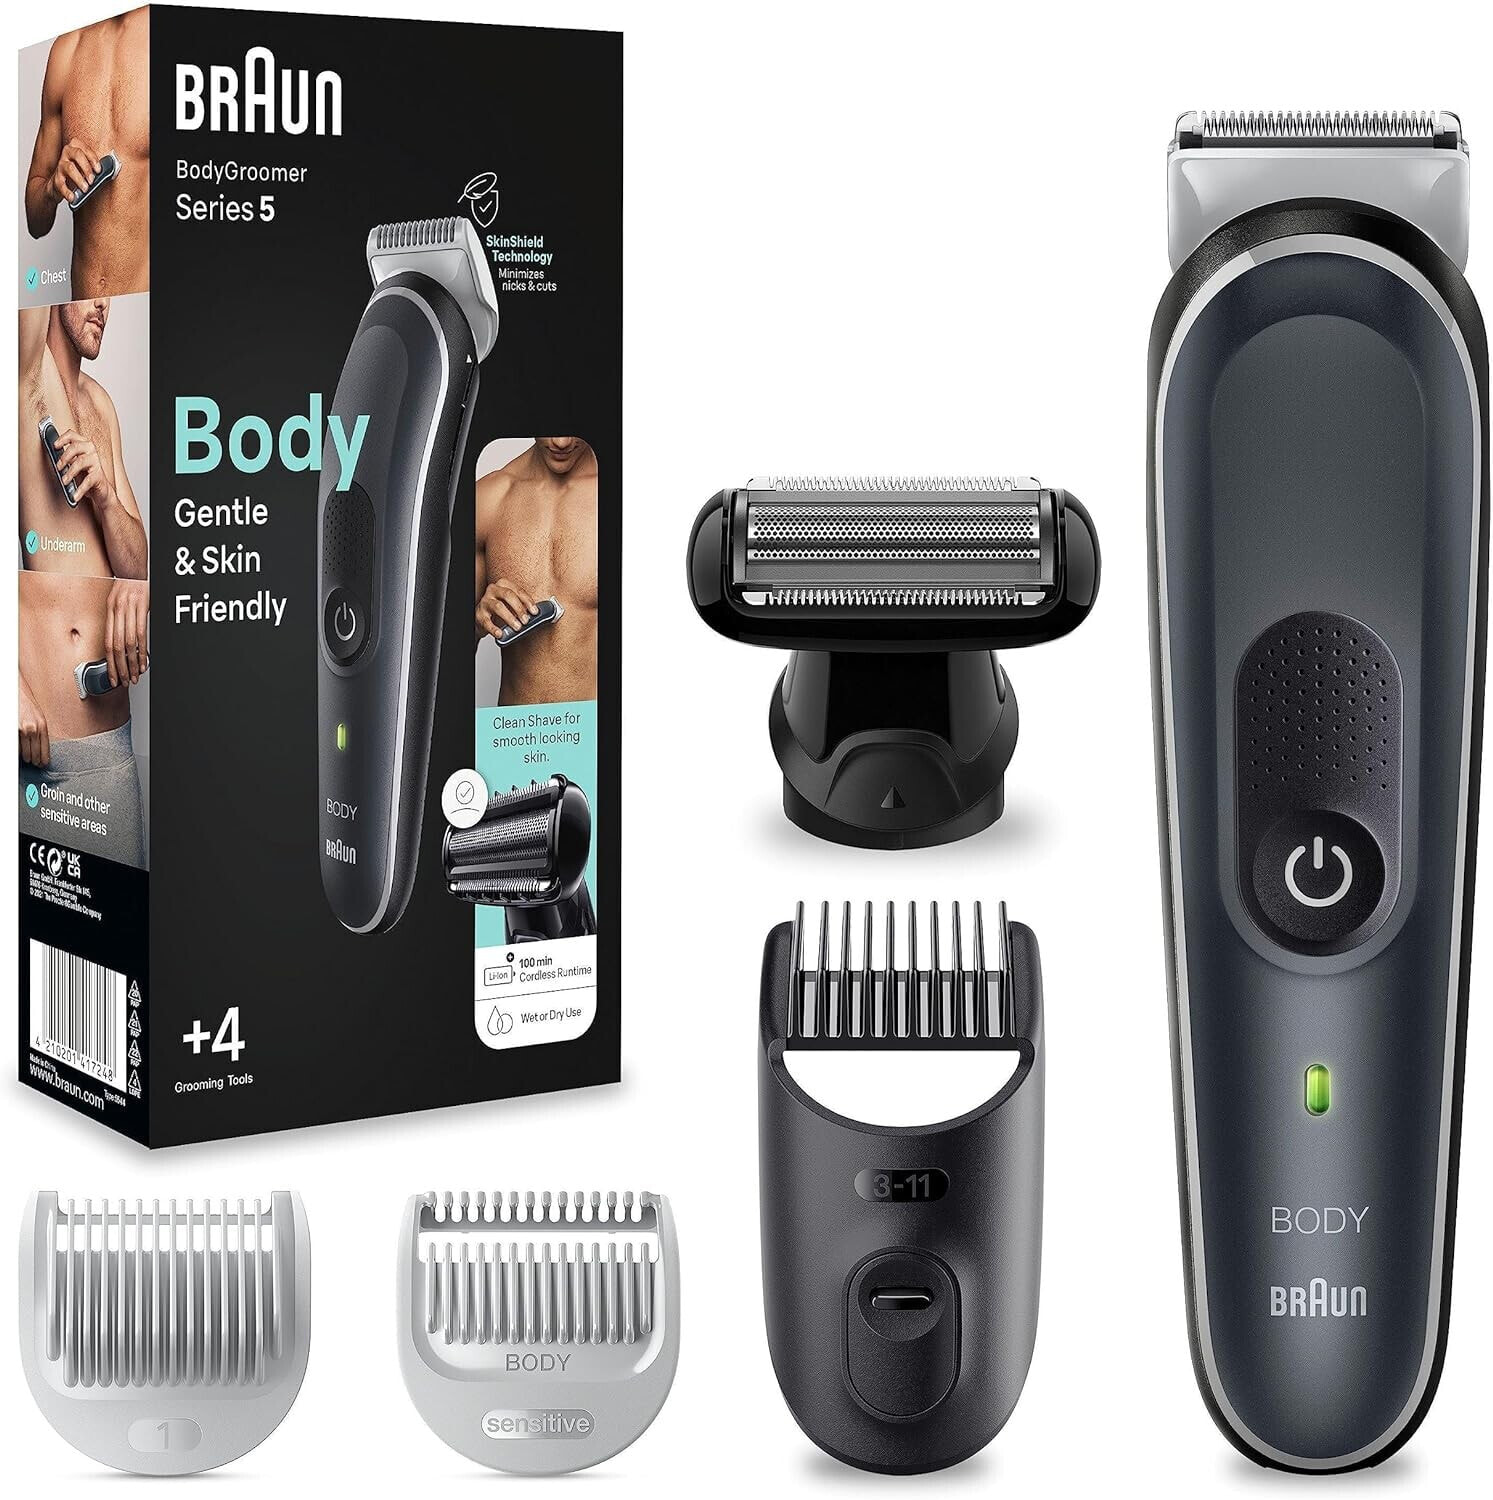 Braun Series 5 Body Groomer/Intimate Shaver Man, Body Care and Hair Removal for Men, Chest, Armpits, Comb Attachments 1 - 11 mm, Smooth Shaving Attachment, Valentine's Day Gift for Him, BG5360